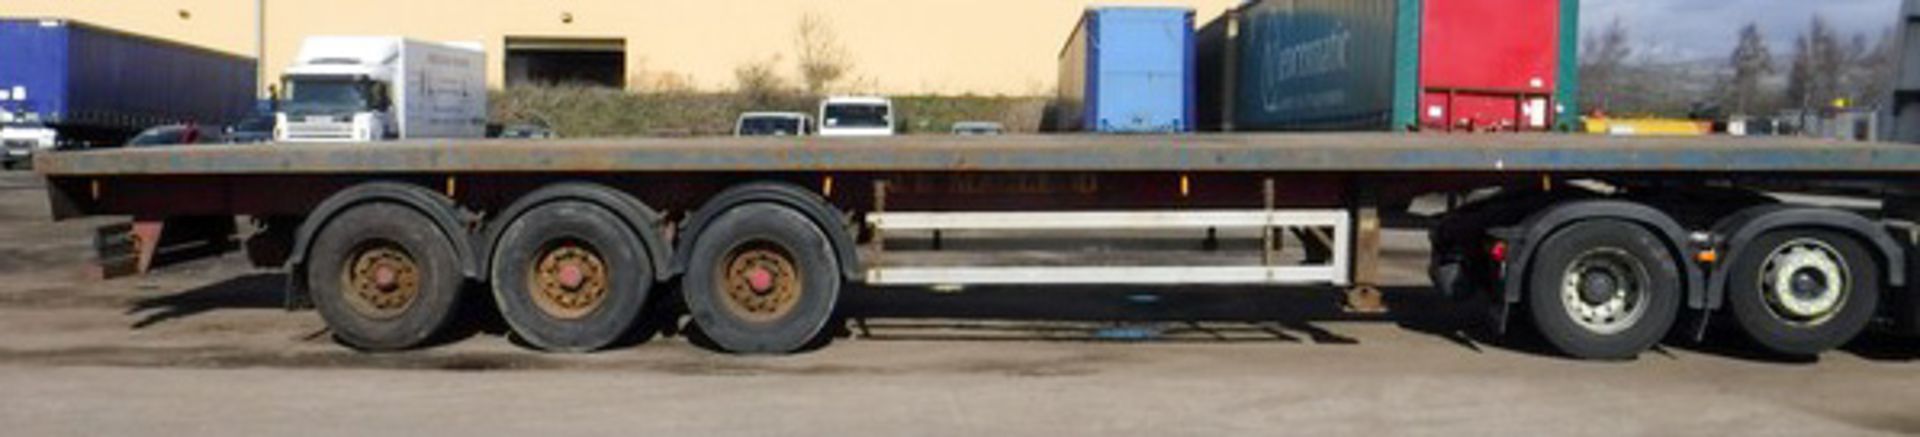 2004 MONTRACON FLATBED, REG C160047, ID 22187, 3 AXLES, MOT UNTIL NOVEMBER 2018 NO DOC IN OFFICE - Image 5 of 9